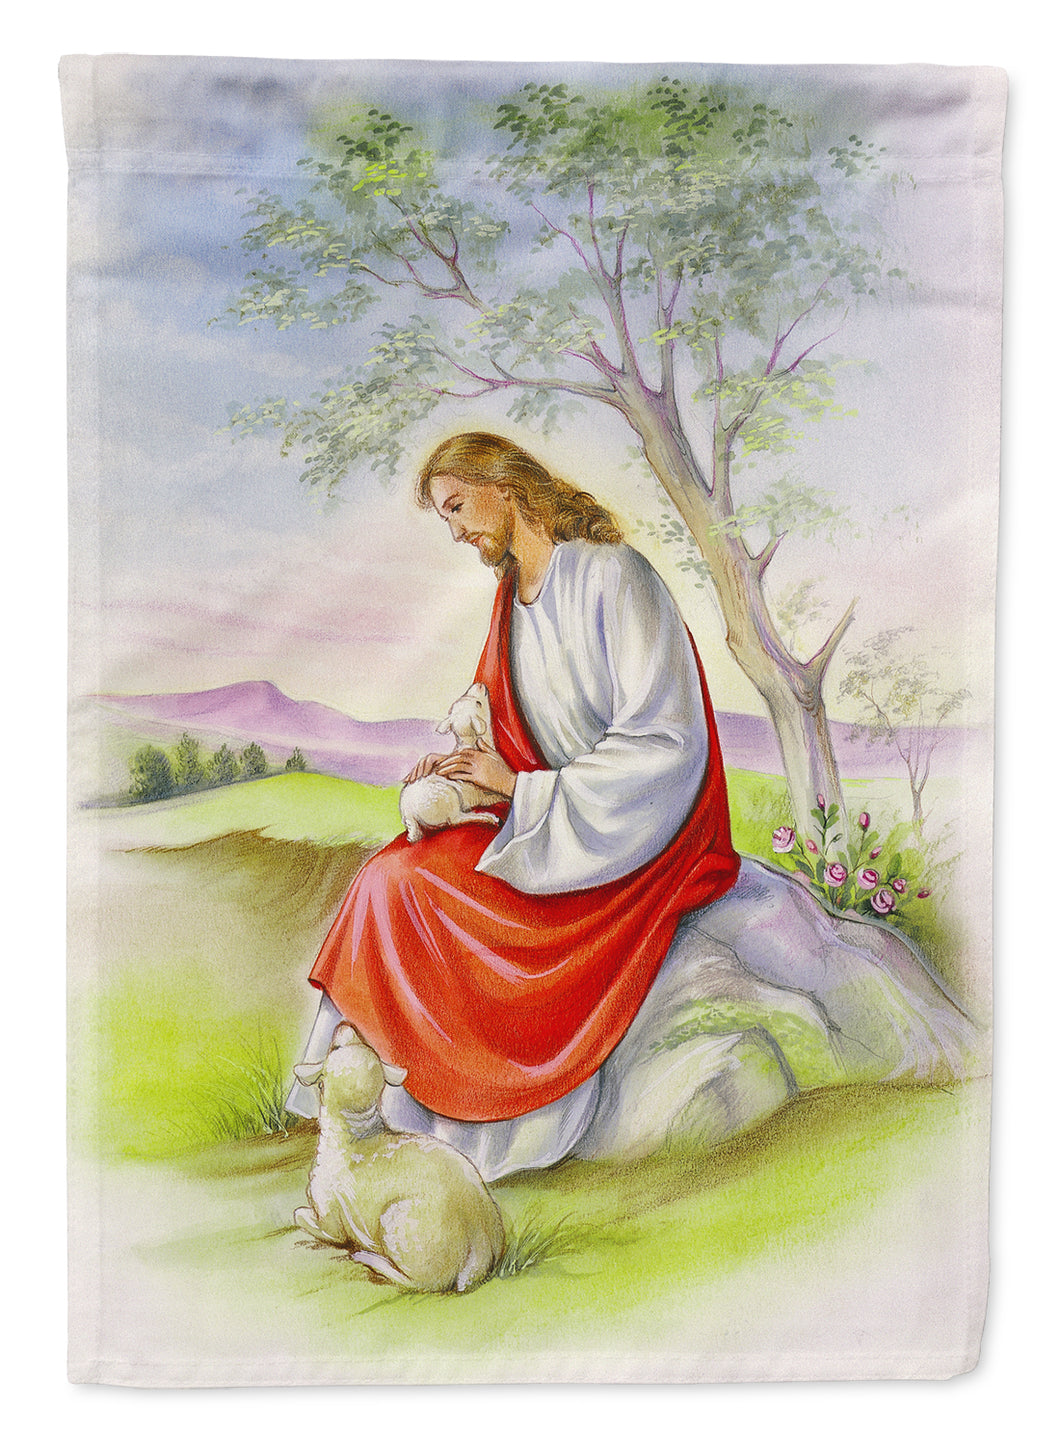 Jesus With Lamb Garden Flag 2-Sided 2-Ply